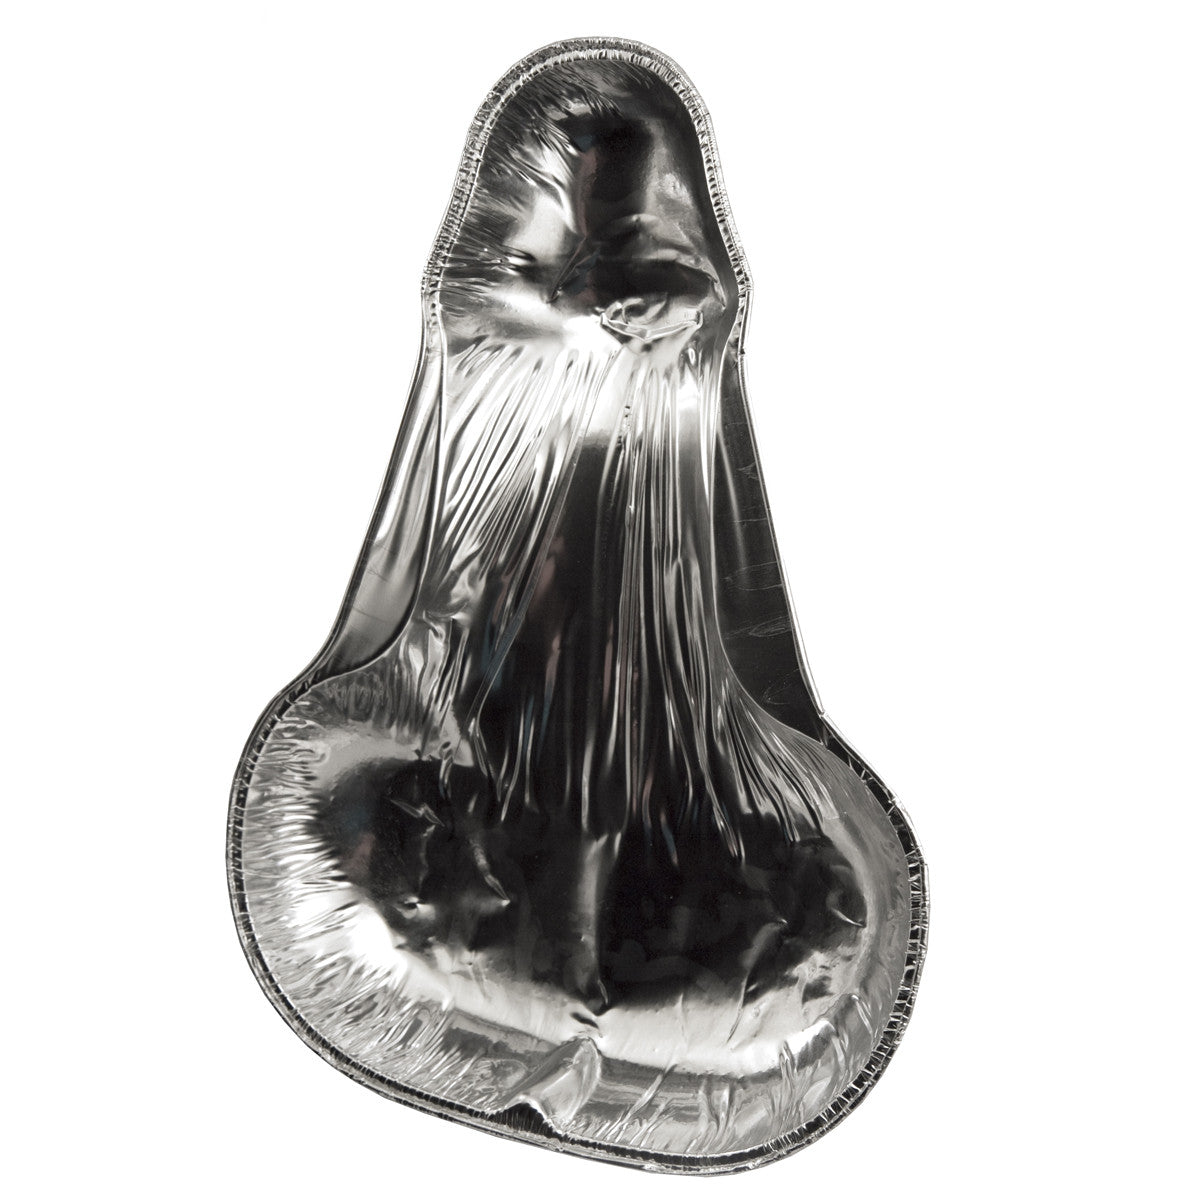 Bachelorette Pecker 14 Cake Pans 2pk Large Penis Shaped Disposable Cake Pans  Shaped Like Willies Great Party Penis Cake Form Mold Pan 